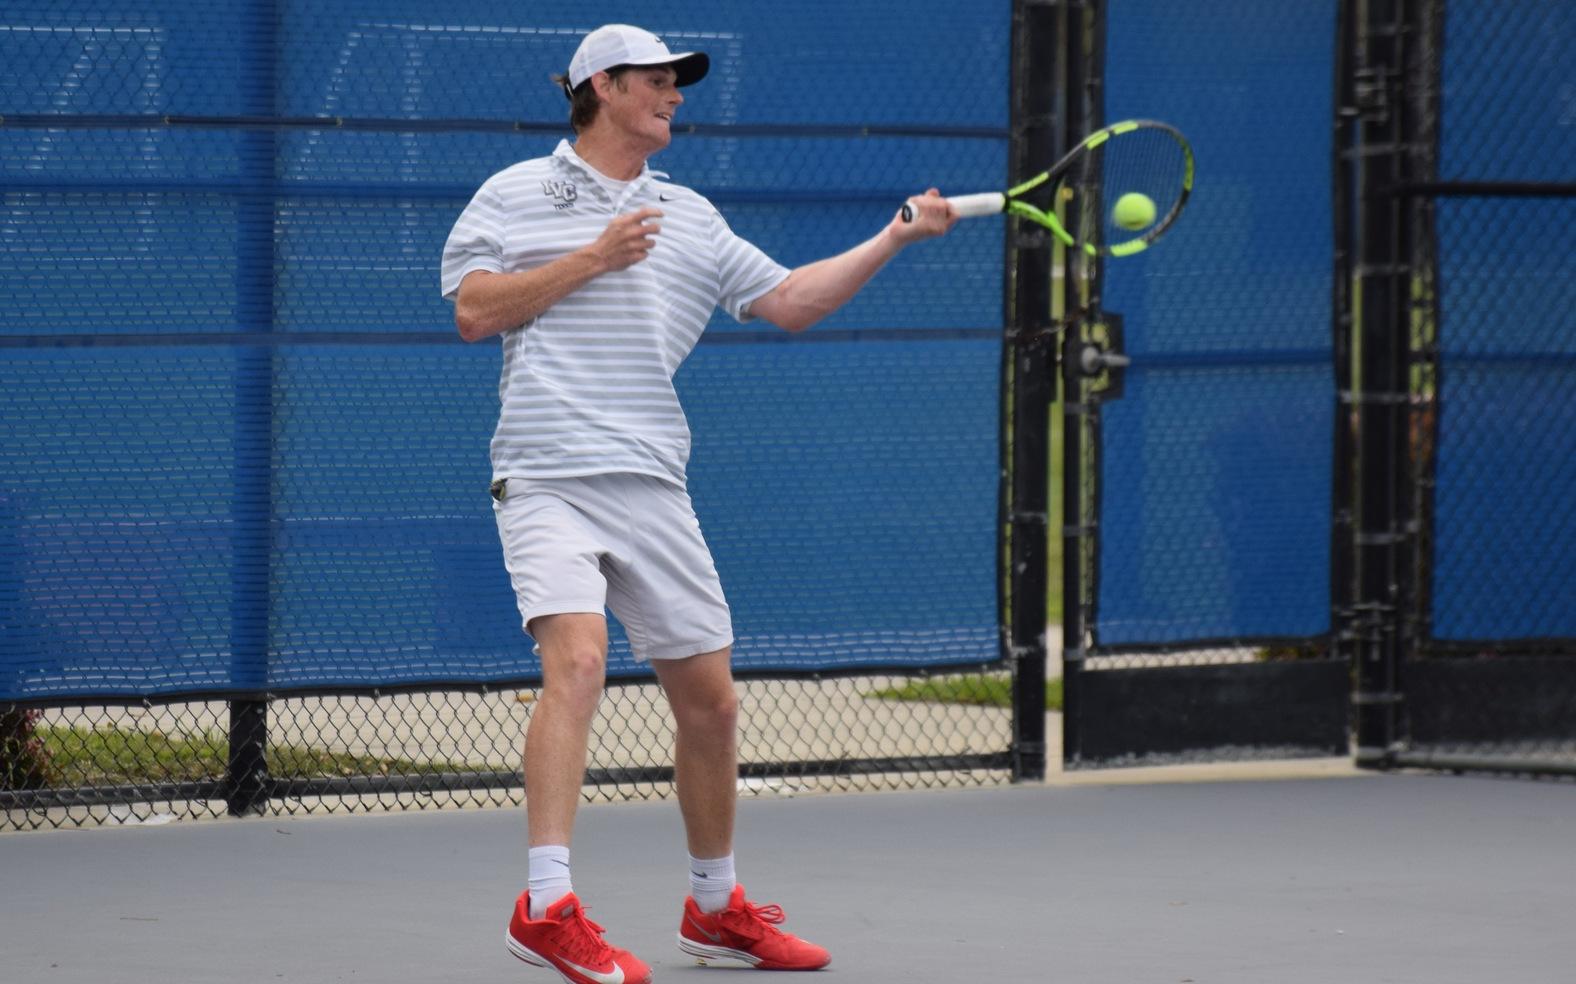 Men's tennis team stays in third place in standings with win at OCC